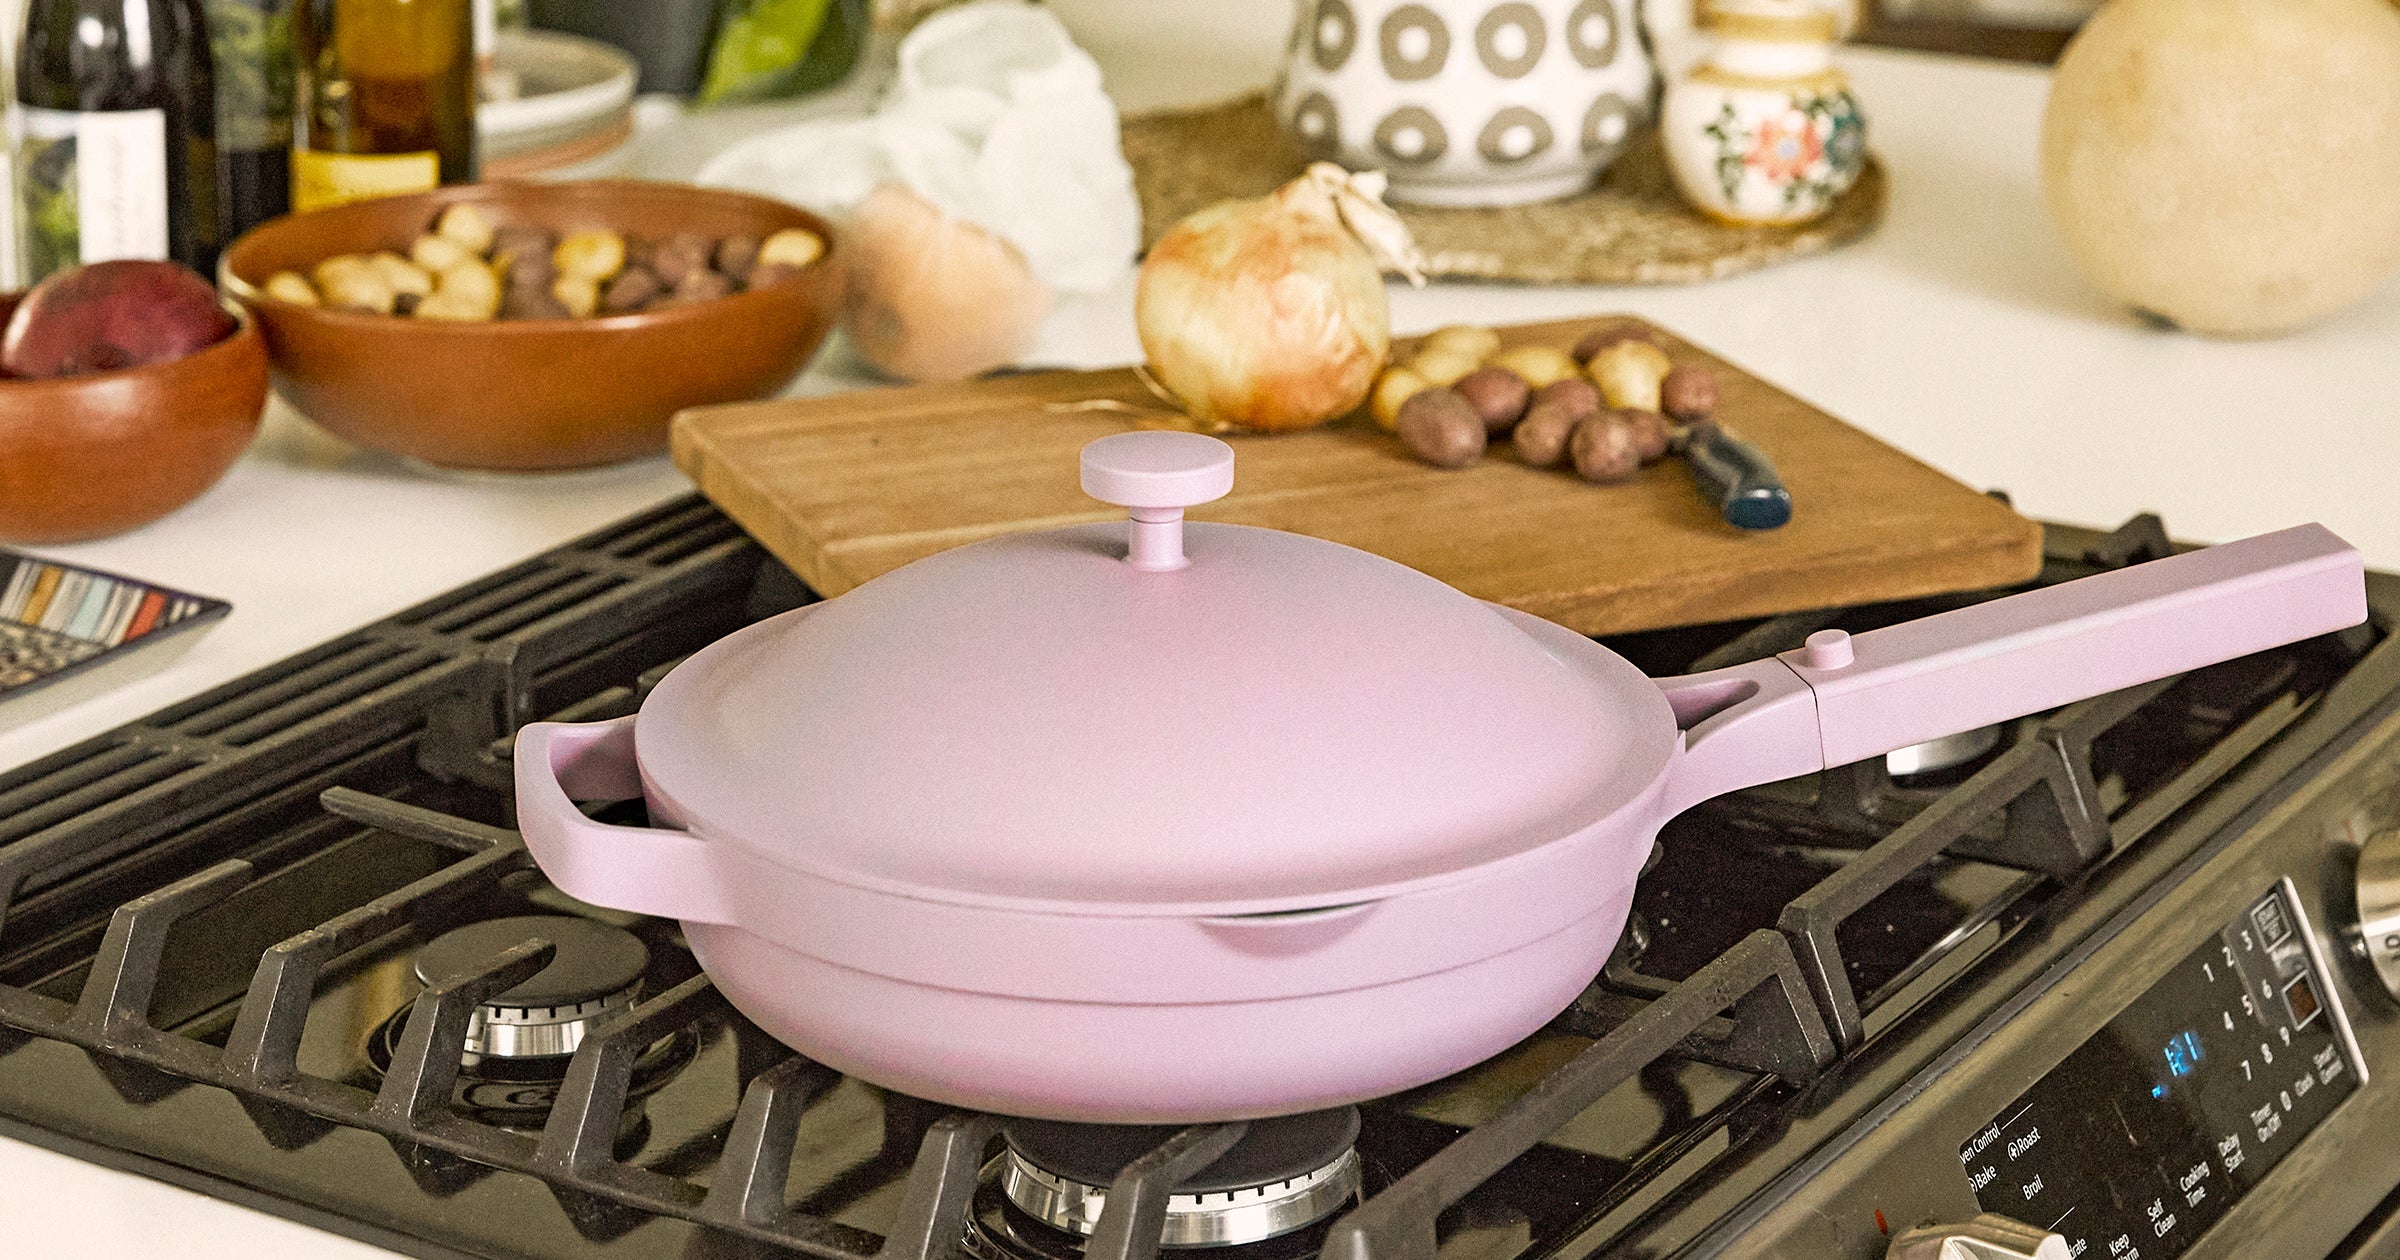 Our Place New Always Pan Lavender Colored Cookware 2020